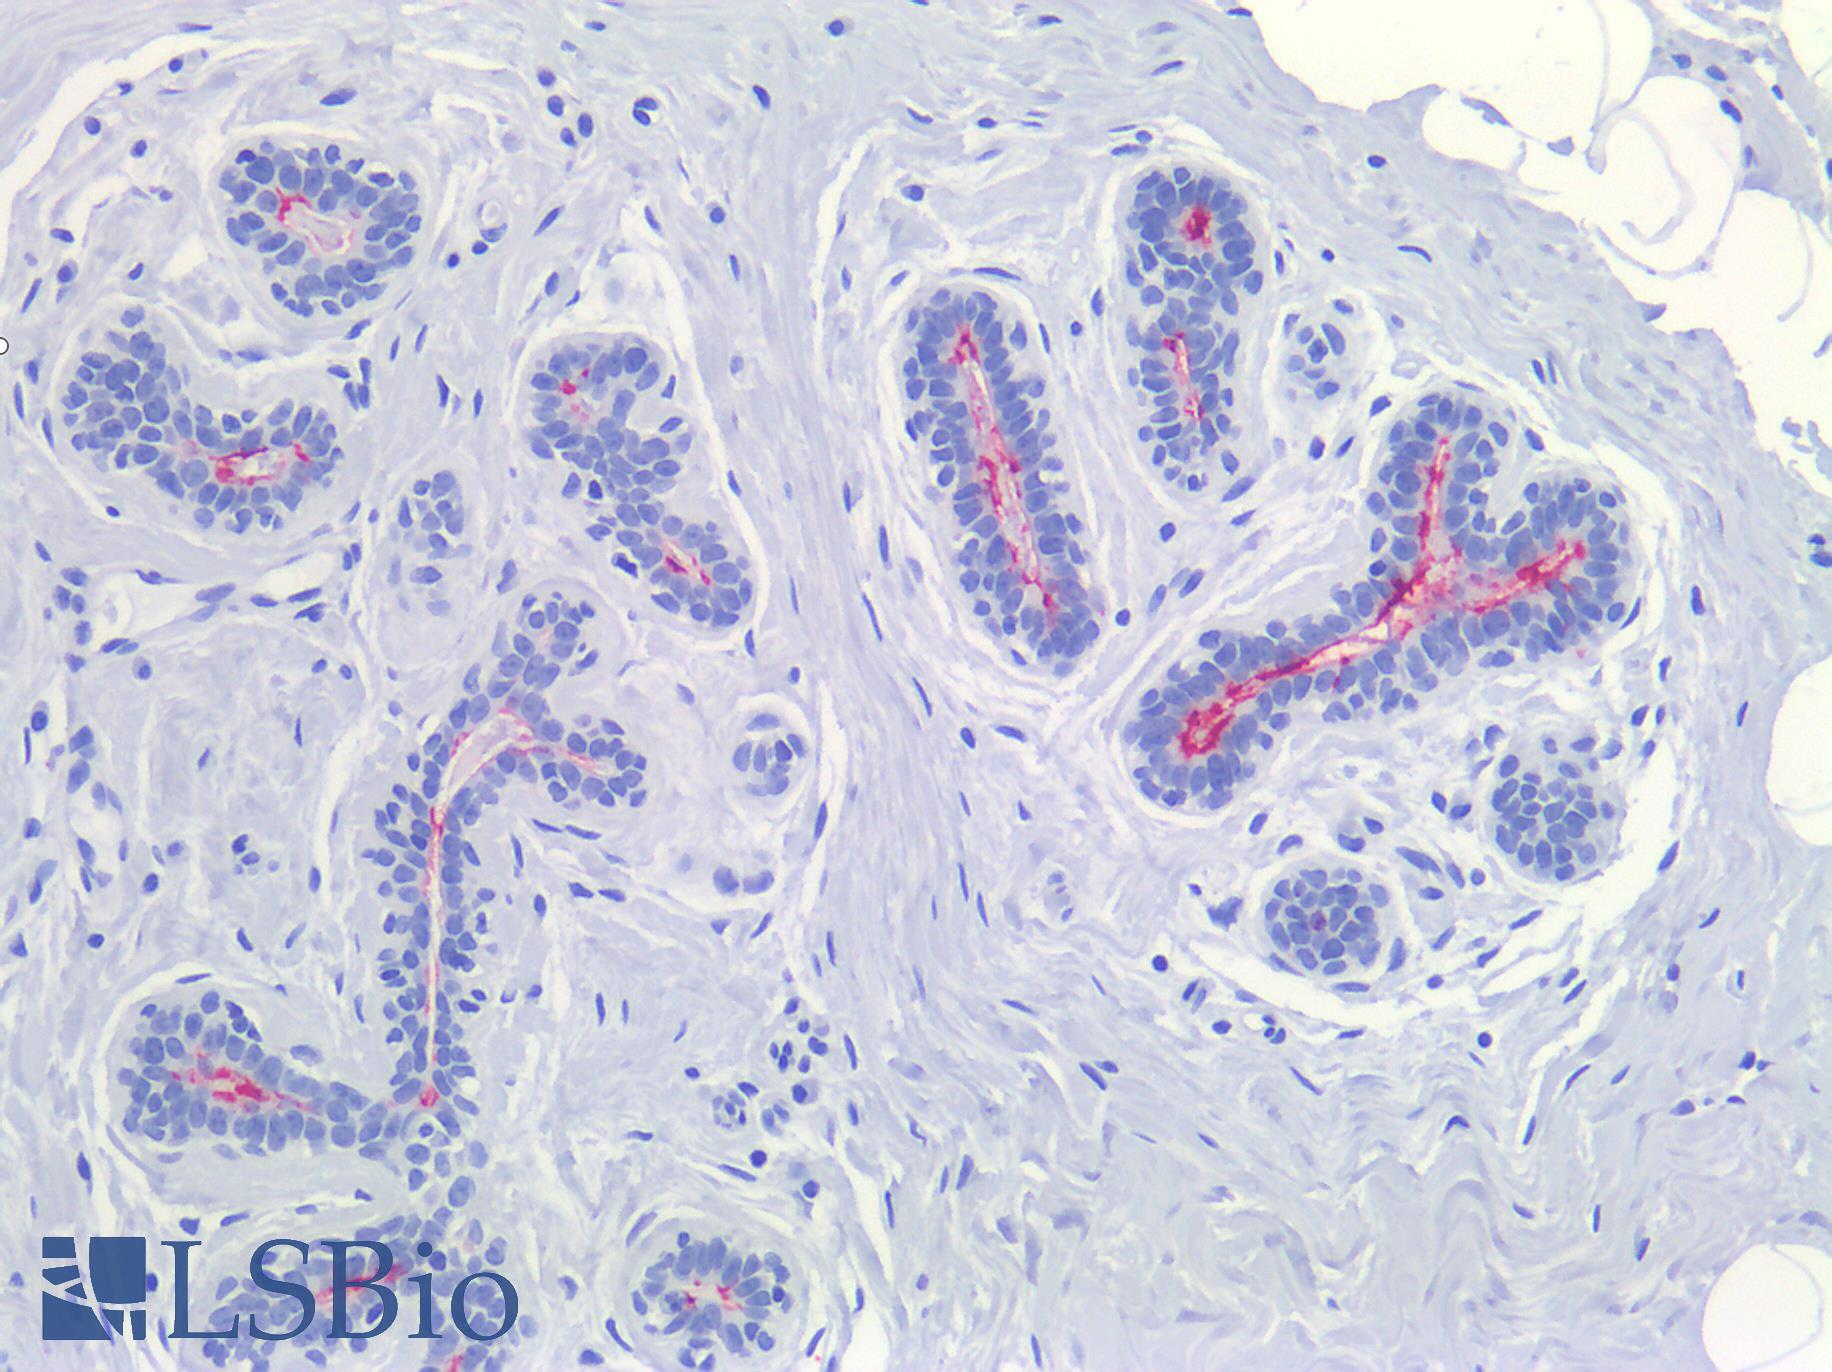 Sialylated Lewis a / CA 19-9 Antibody - Human Breast: Formalin-Fixed, Paraffin-Embedded (FFPE)